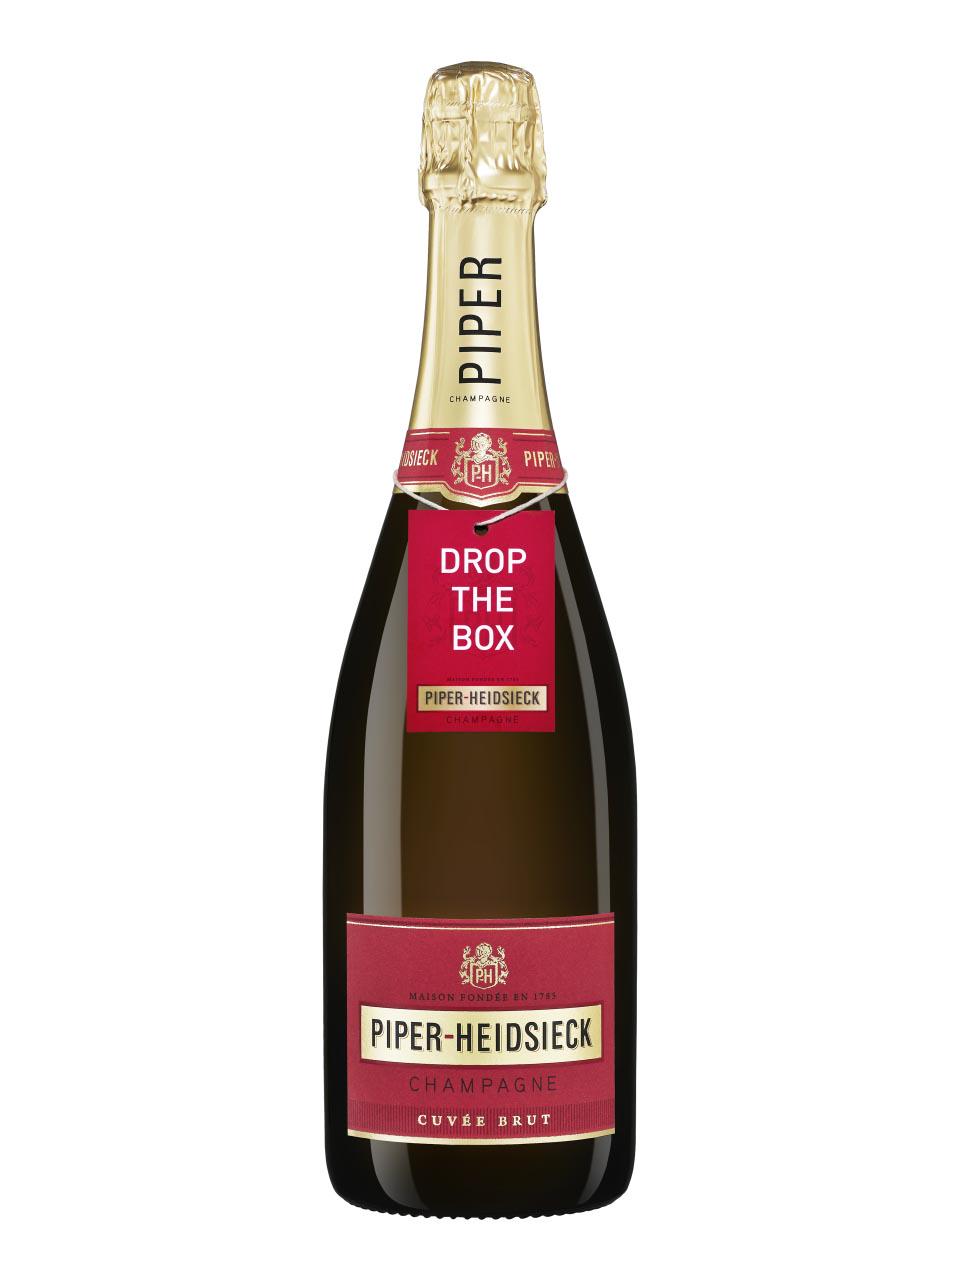 Piper-Heidsieck, Cuvée Brut, Champagne, box) 0.75L Limited Edition Shopping AOC, Airport weiß brut, | gift (Chinese New Online Year Frankfurt